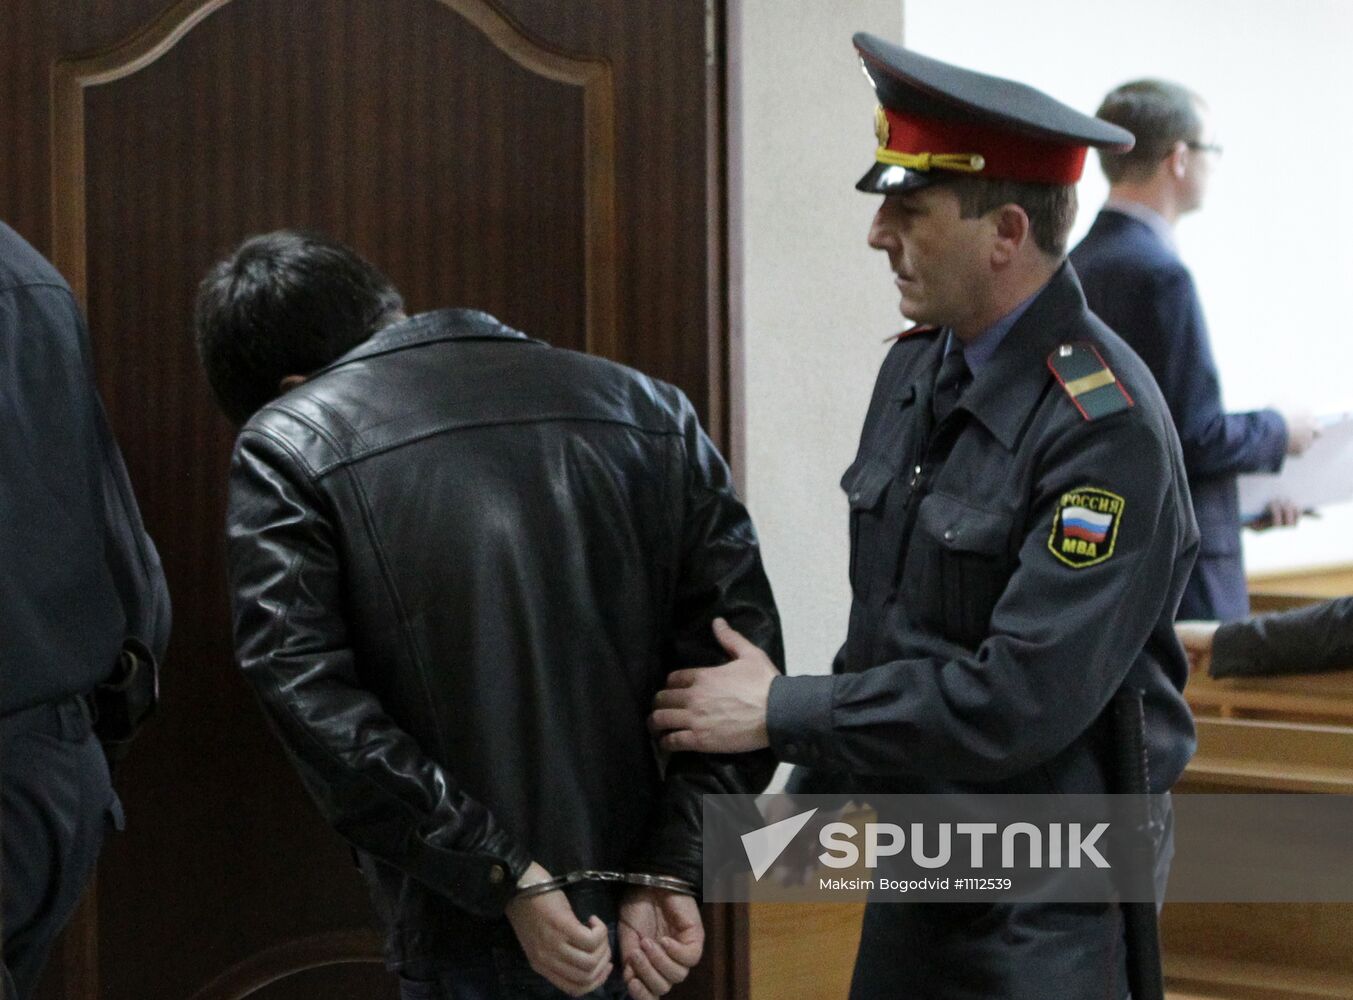 Trial of officers of Dalny internal affairs department in Kazan